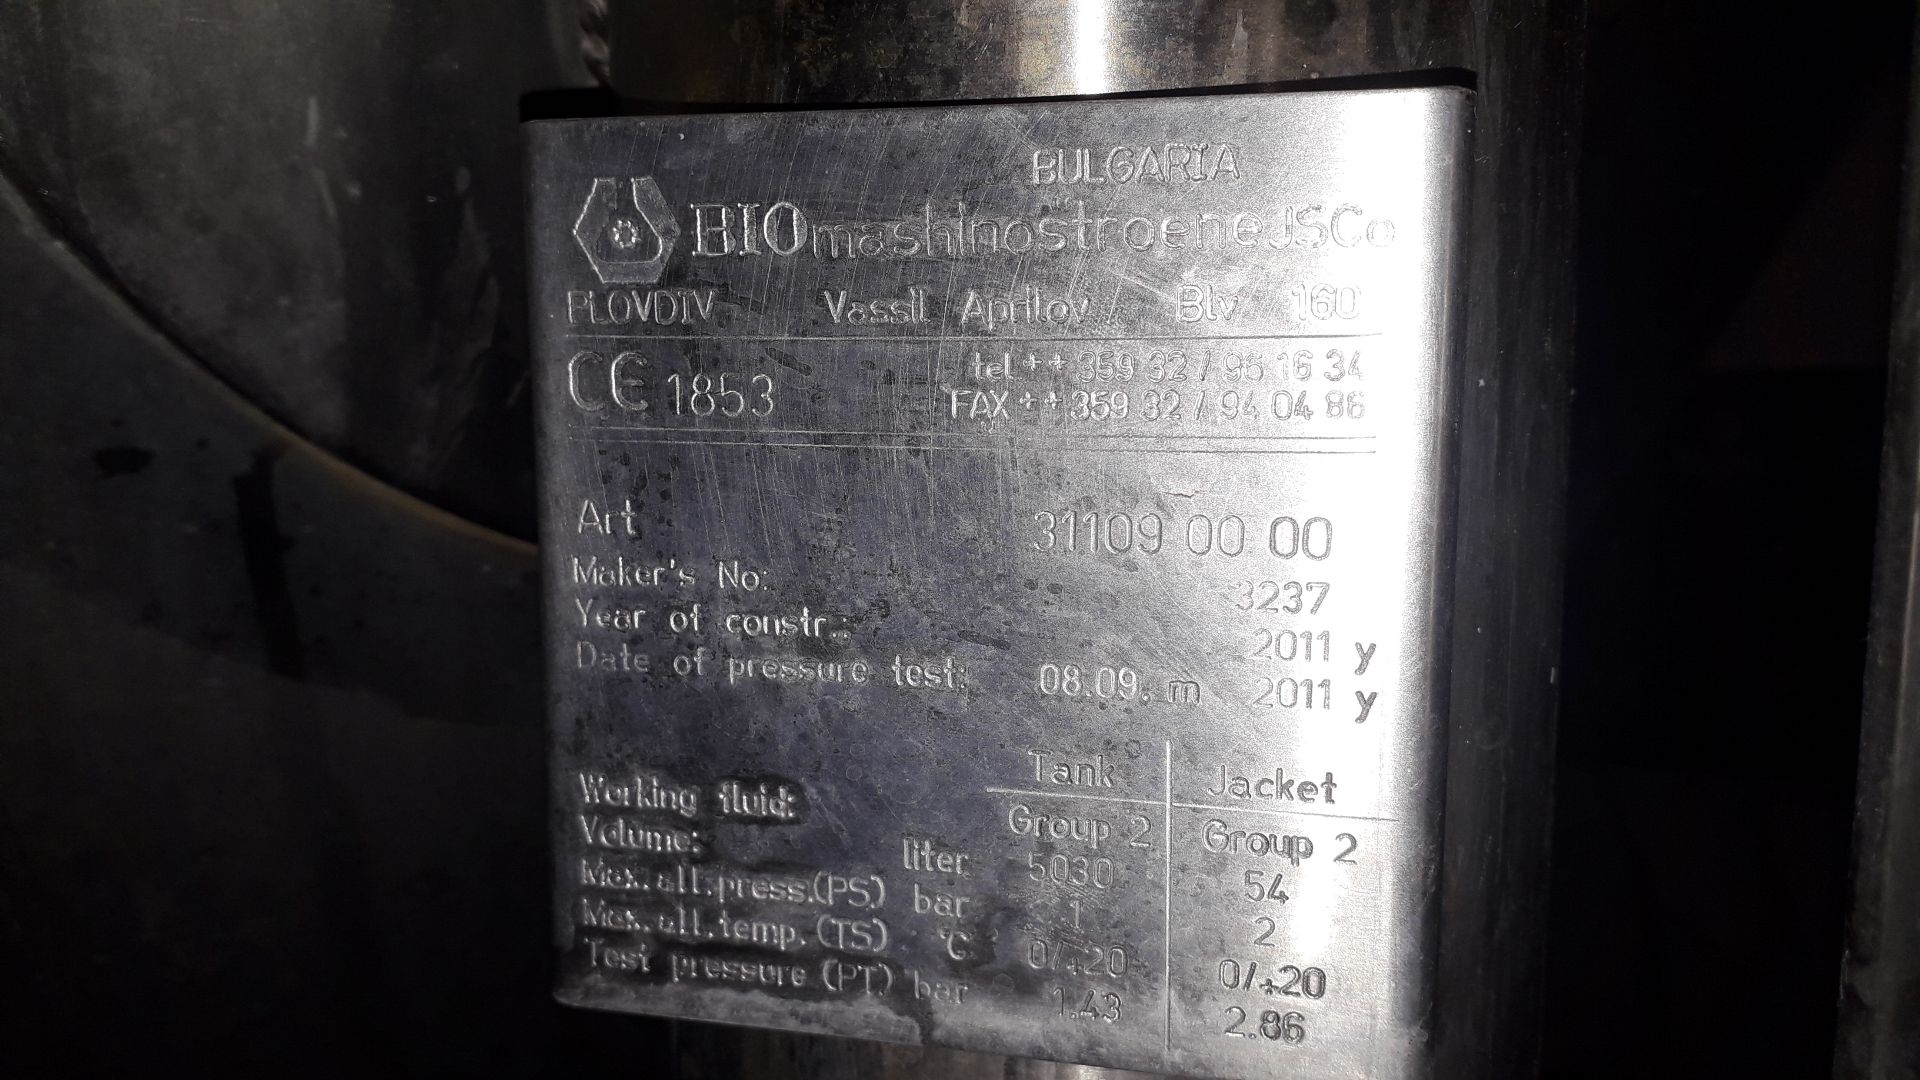 Bio Mashinostroene JSO 5,030Ltr Fermentation Vessel (2011) Serial Number 3237 - Viewing strongly - Image 3 of 3